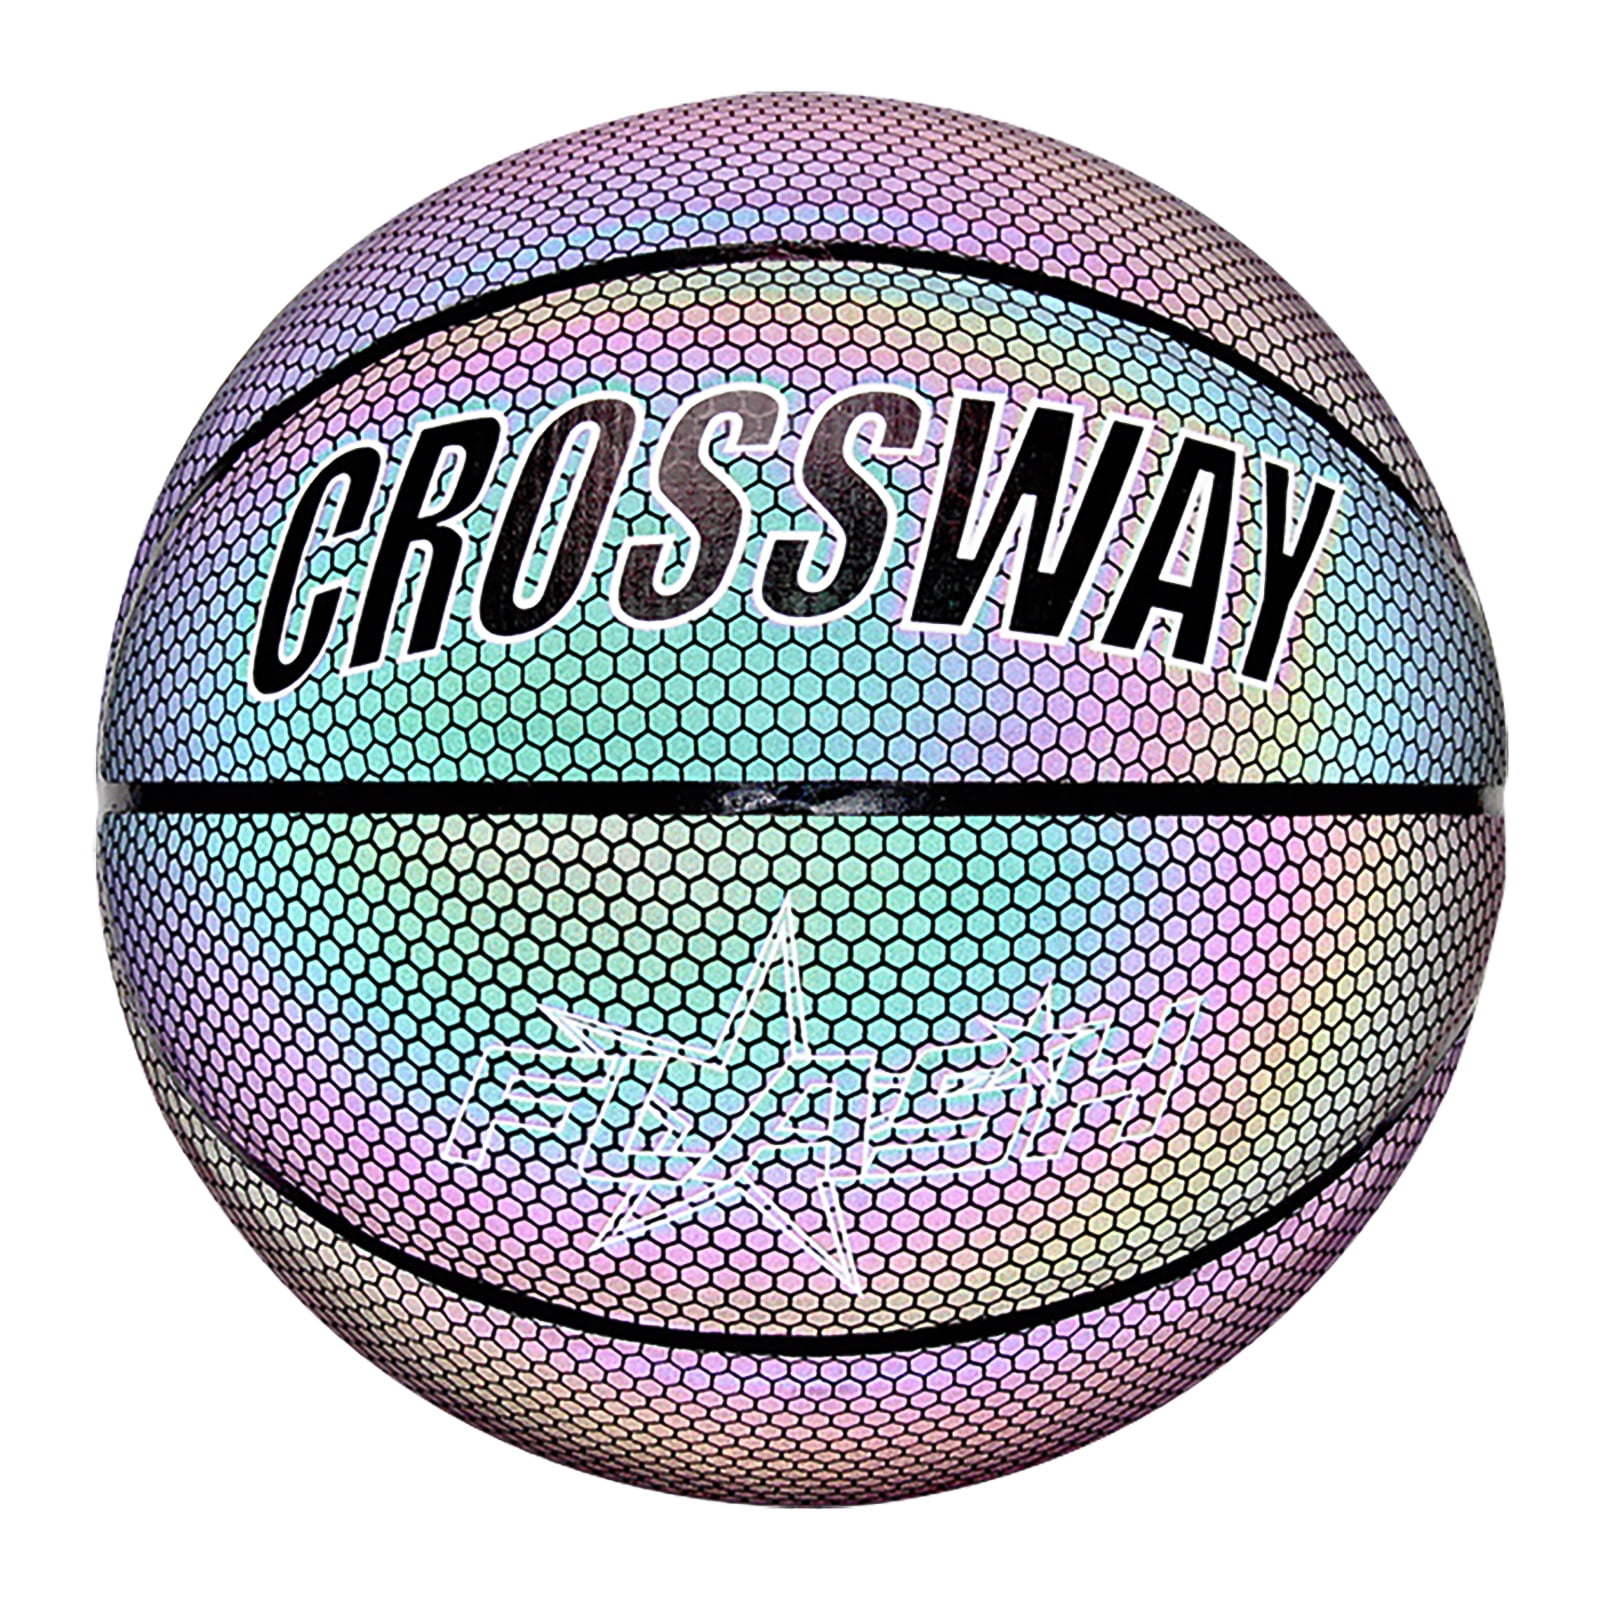 Reflective Glowing Holographic Luminous Basket Ball for Night Game 